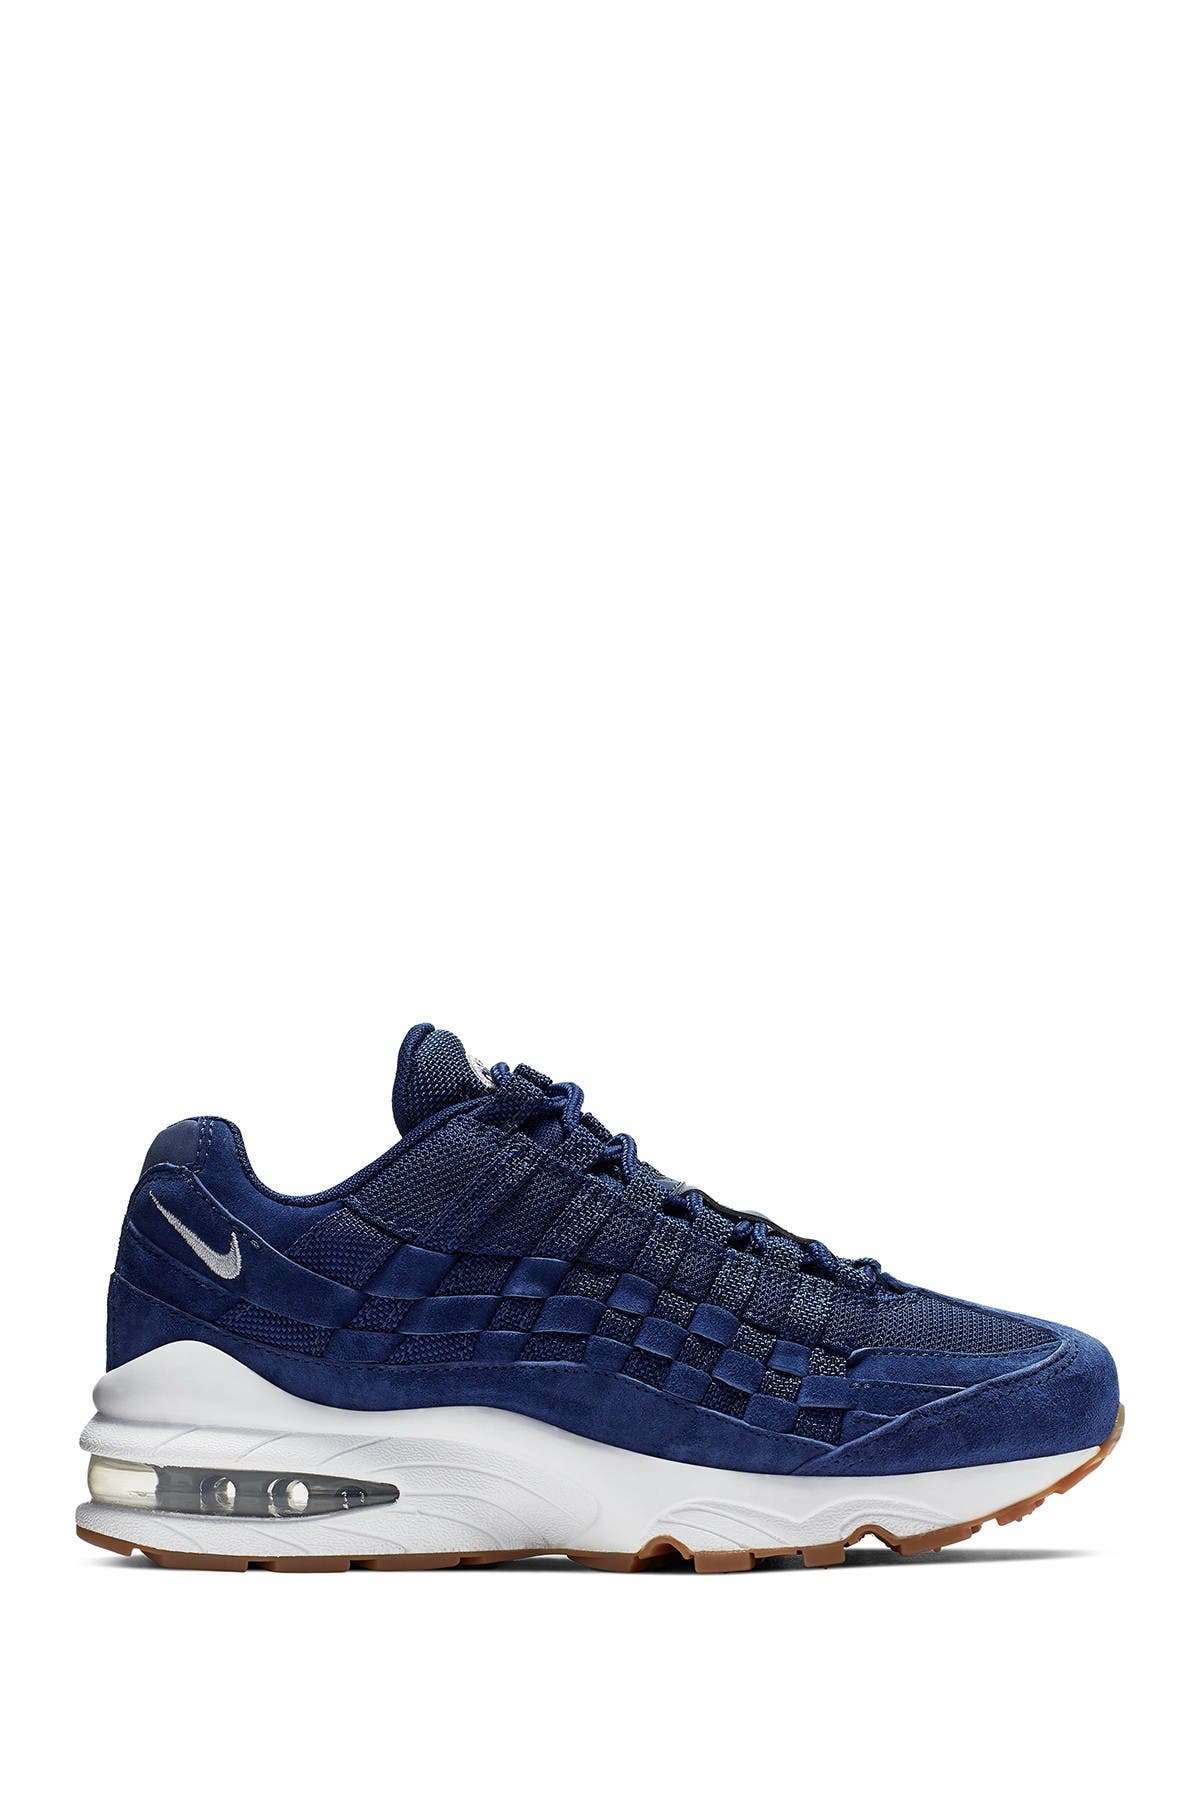 Nike | Air Max 95 Woven | Nordstrom Rack